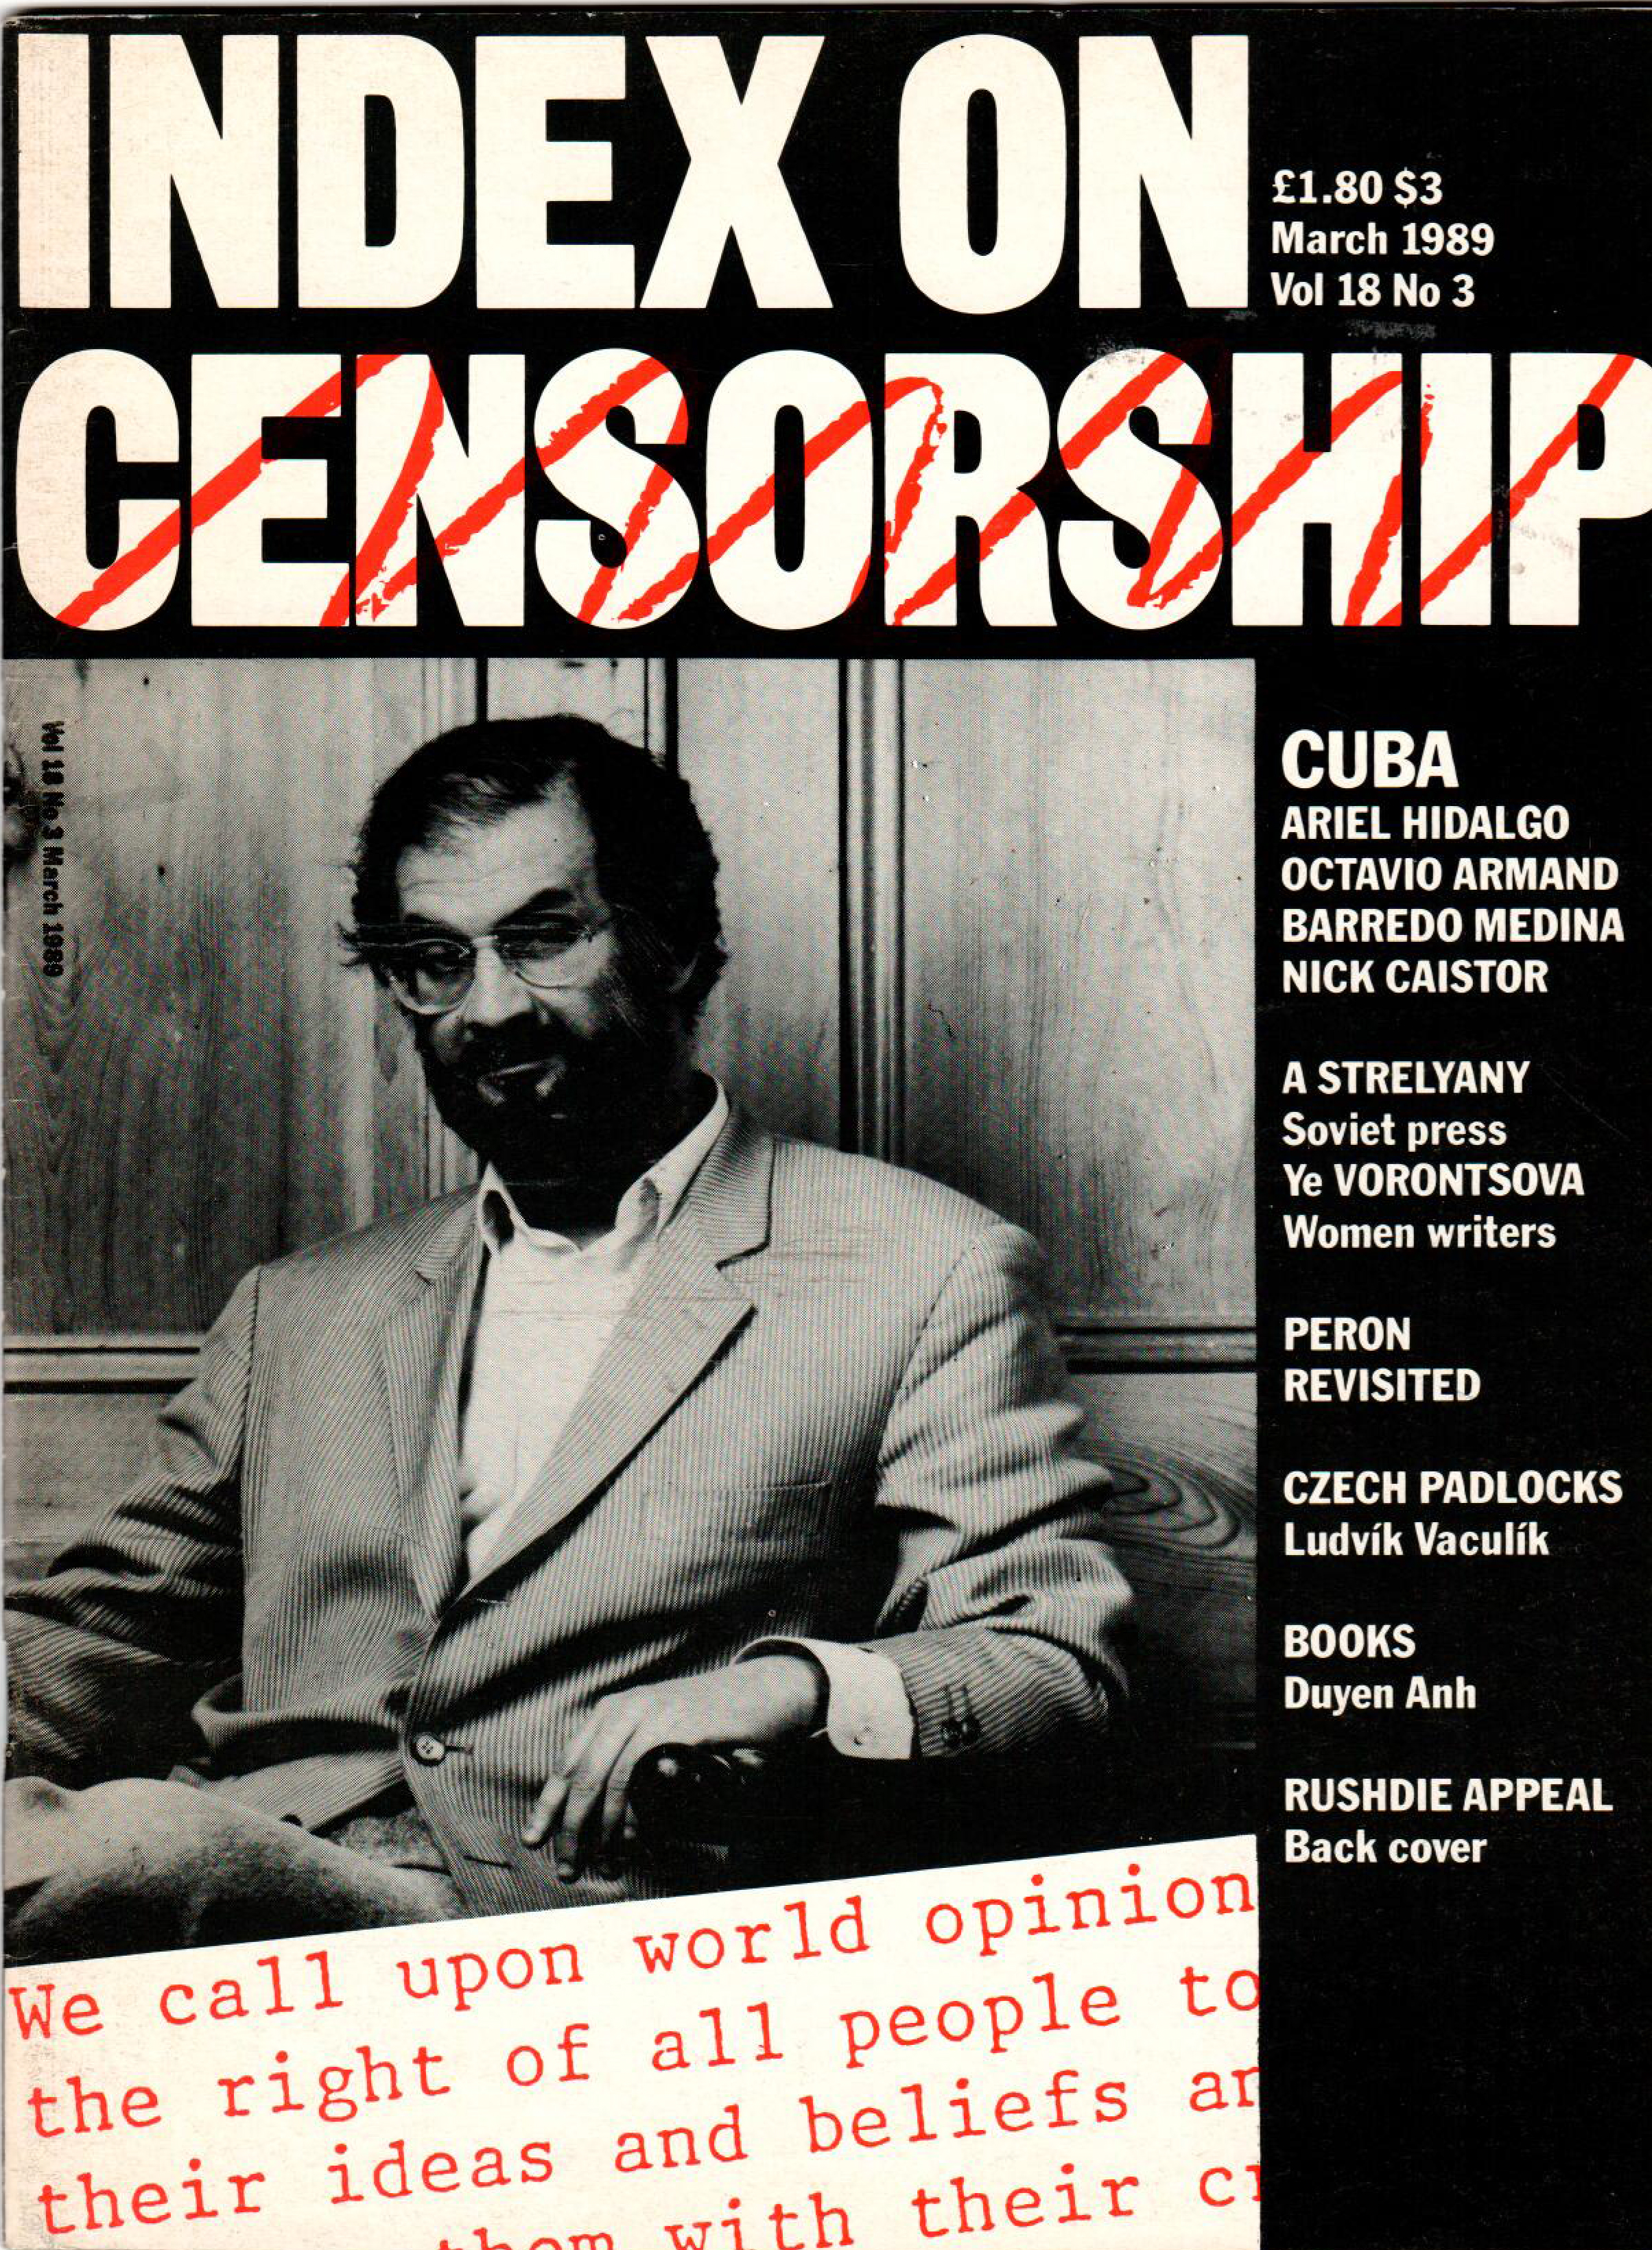 Cuba today, the March 1989 issue of Index on Censorship magazine.